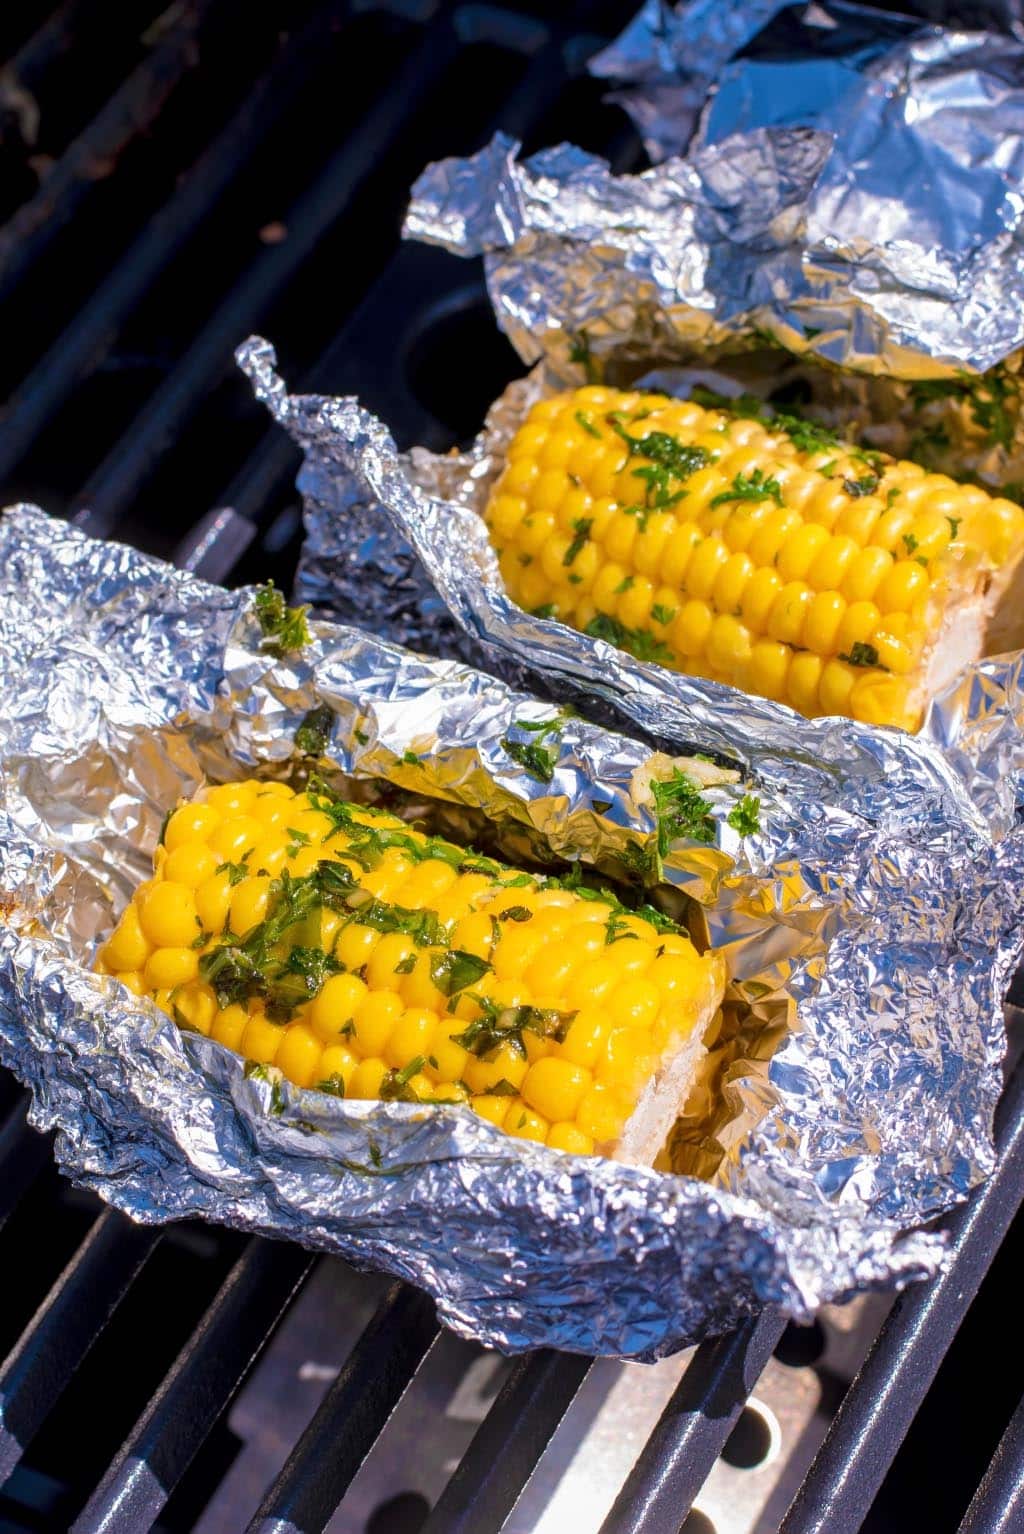 Corn wrapped in open foil on a barbecue grill.